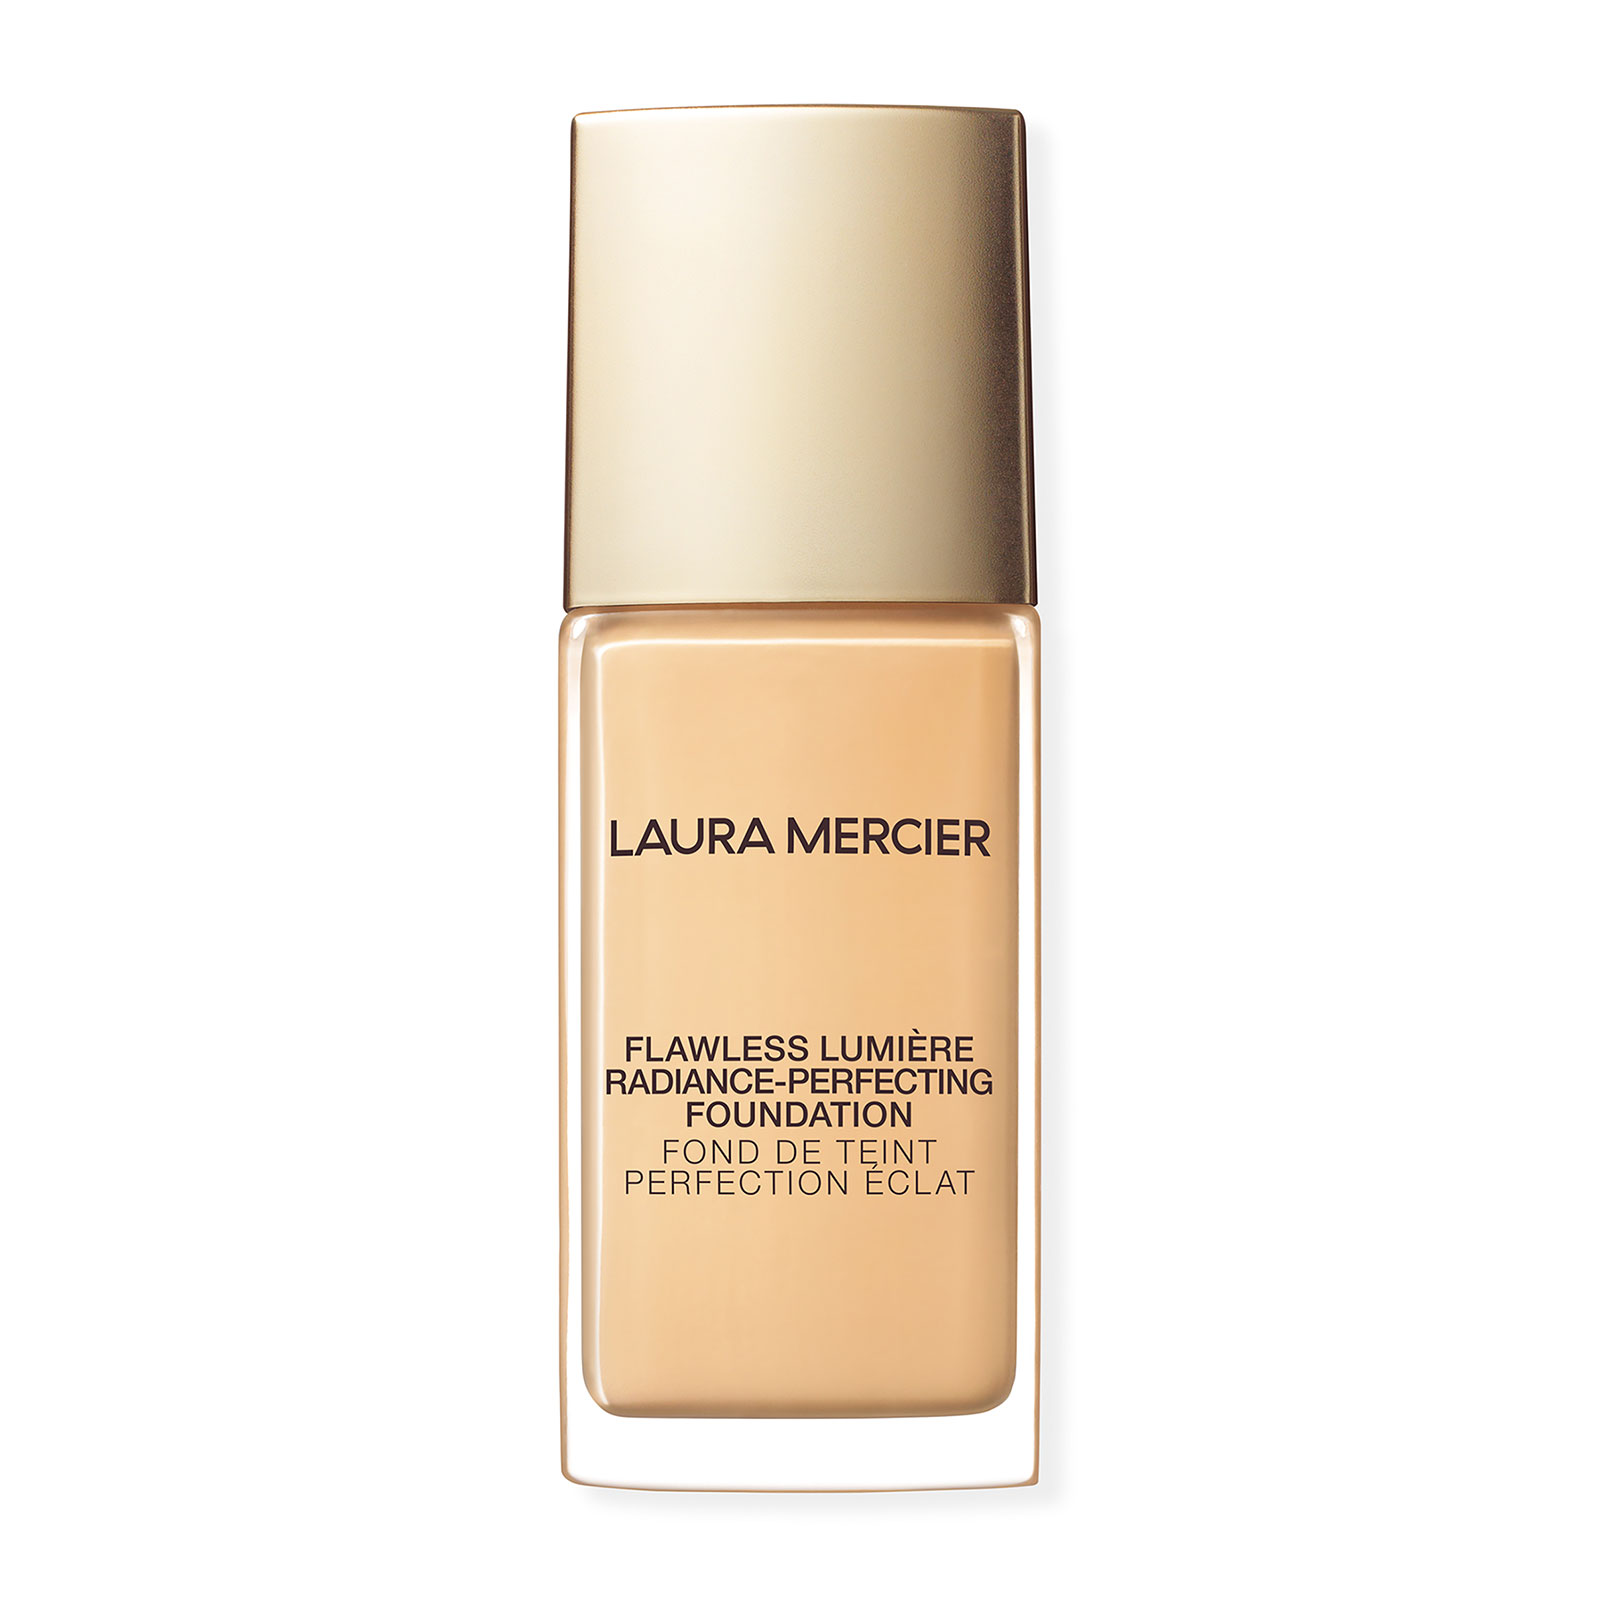 Laura Mercier Flawless Lumiere Radiance-Perfecting Foundation 30Ml 1N2 Vanille